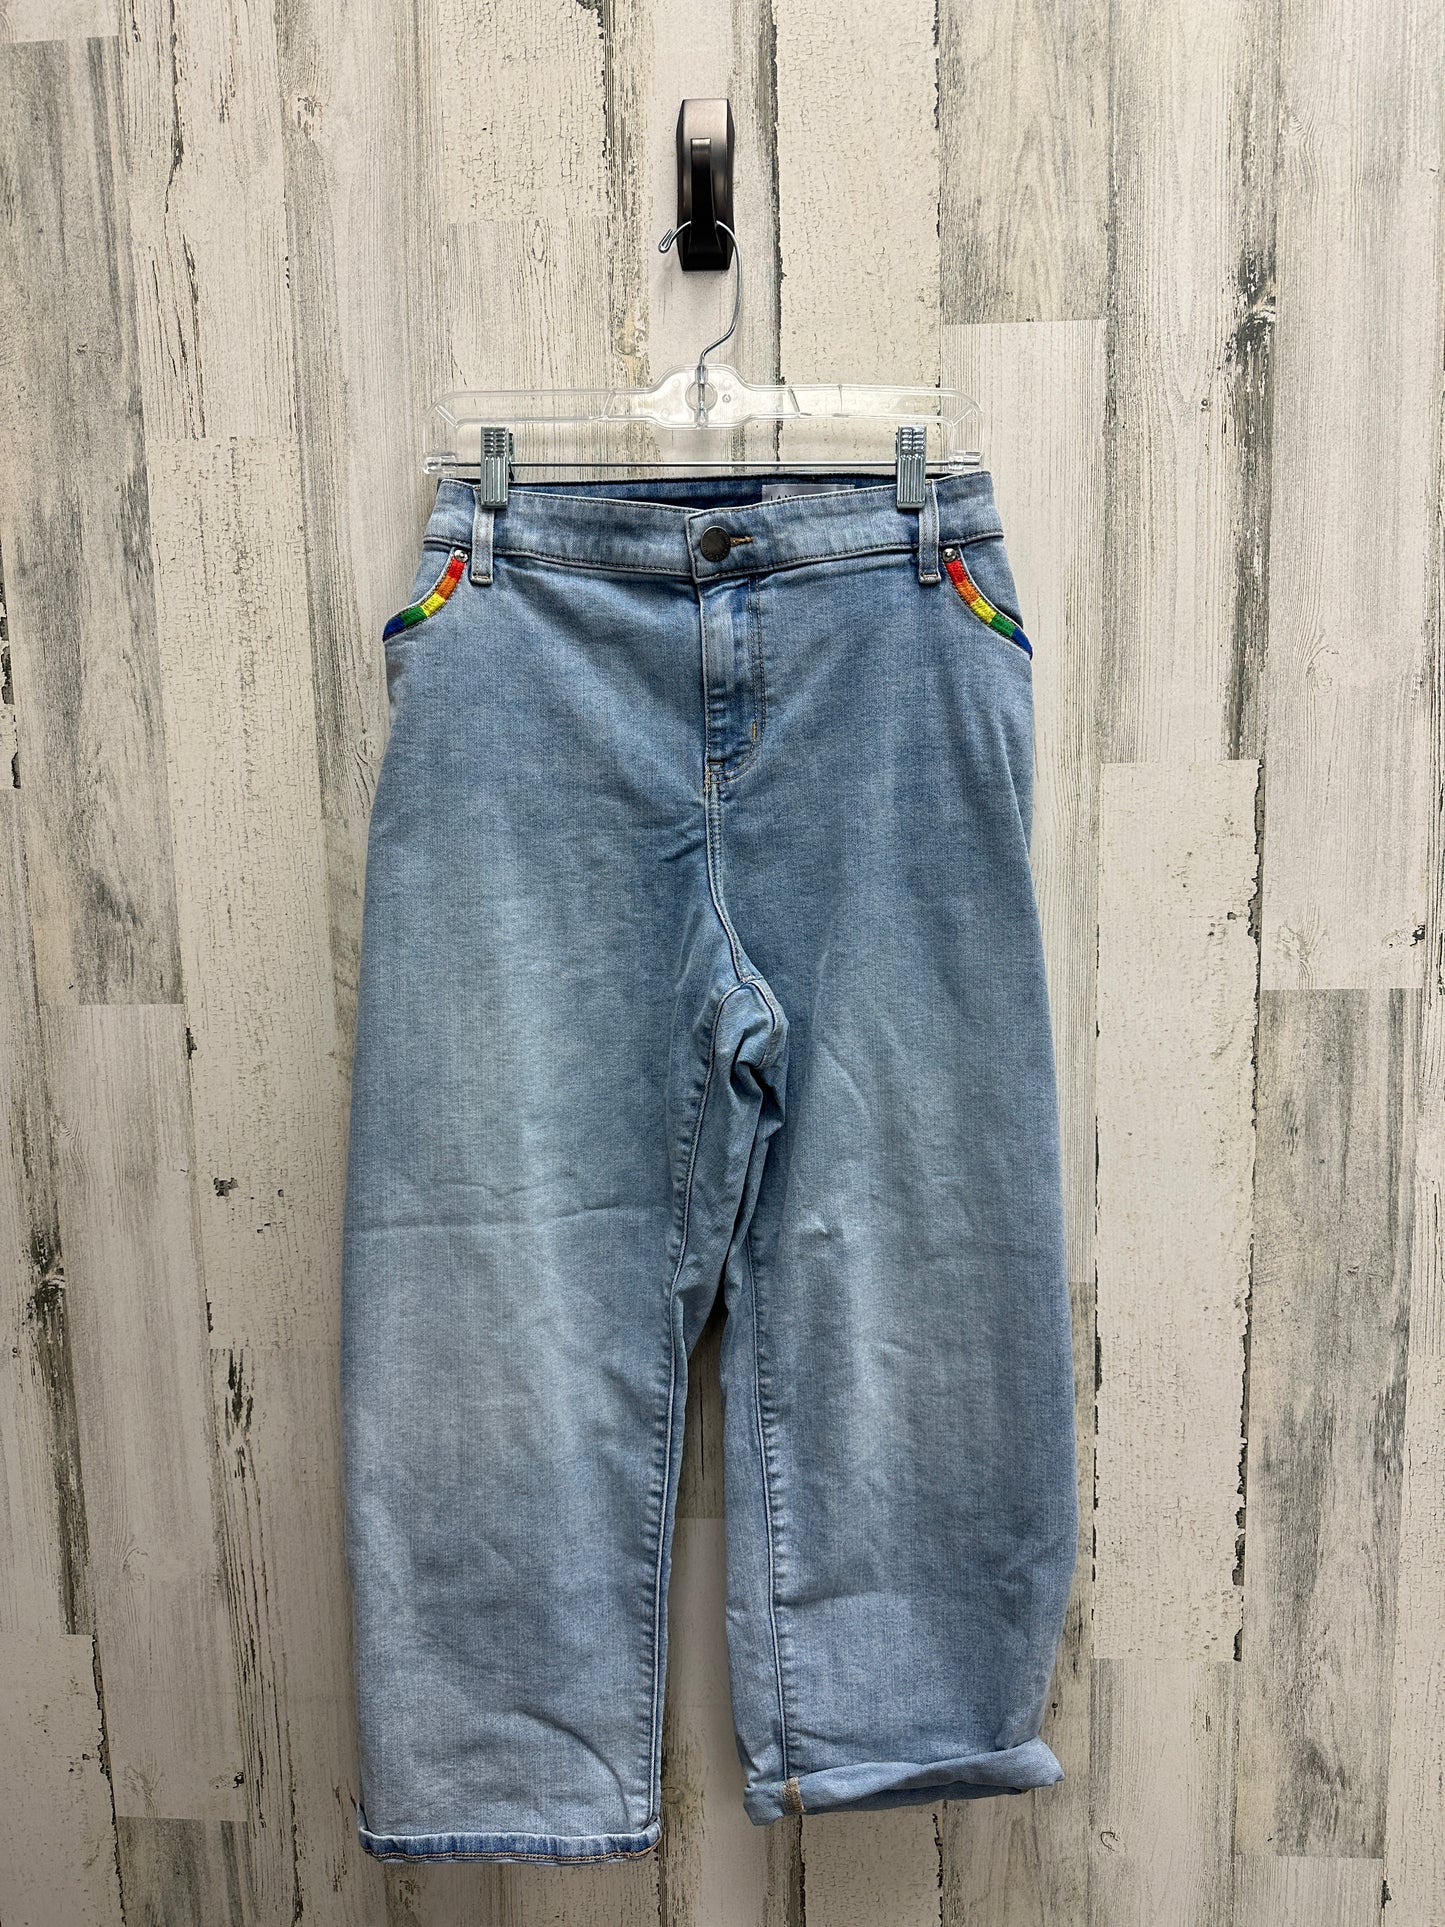 Jeans Relaxed/boyfriend By Lane Bryant  Size: 20